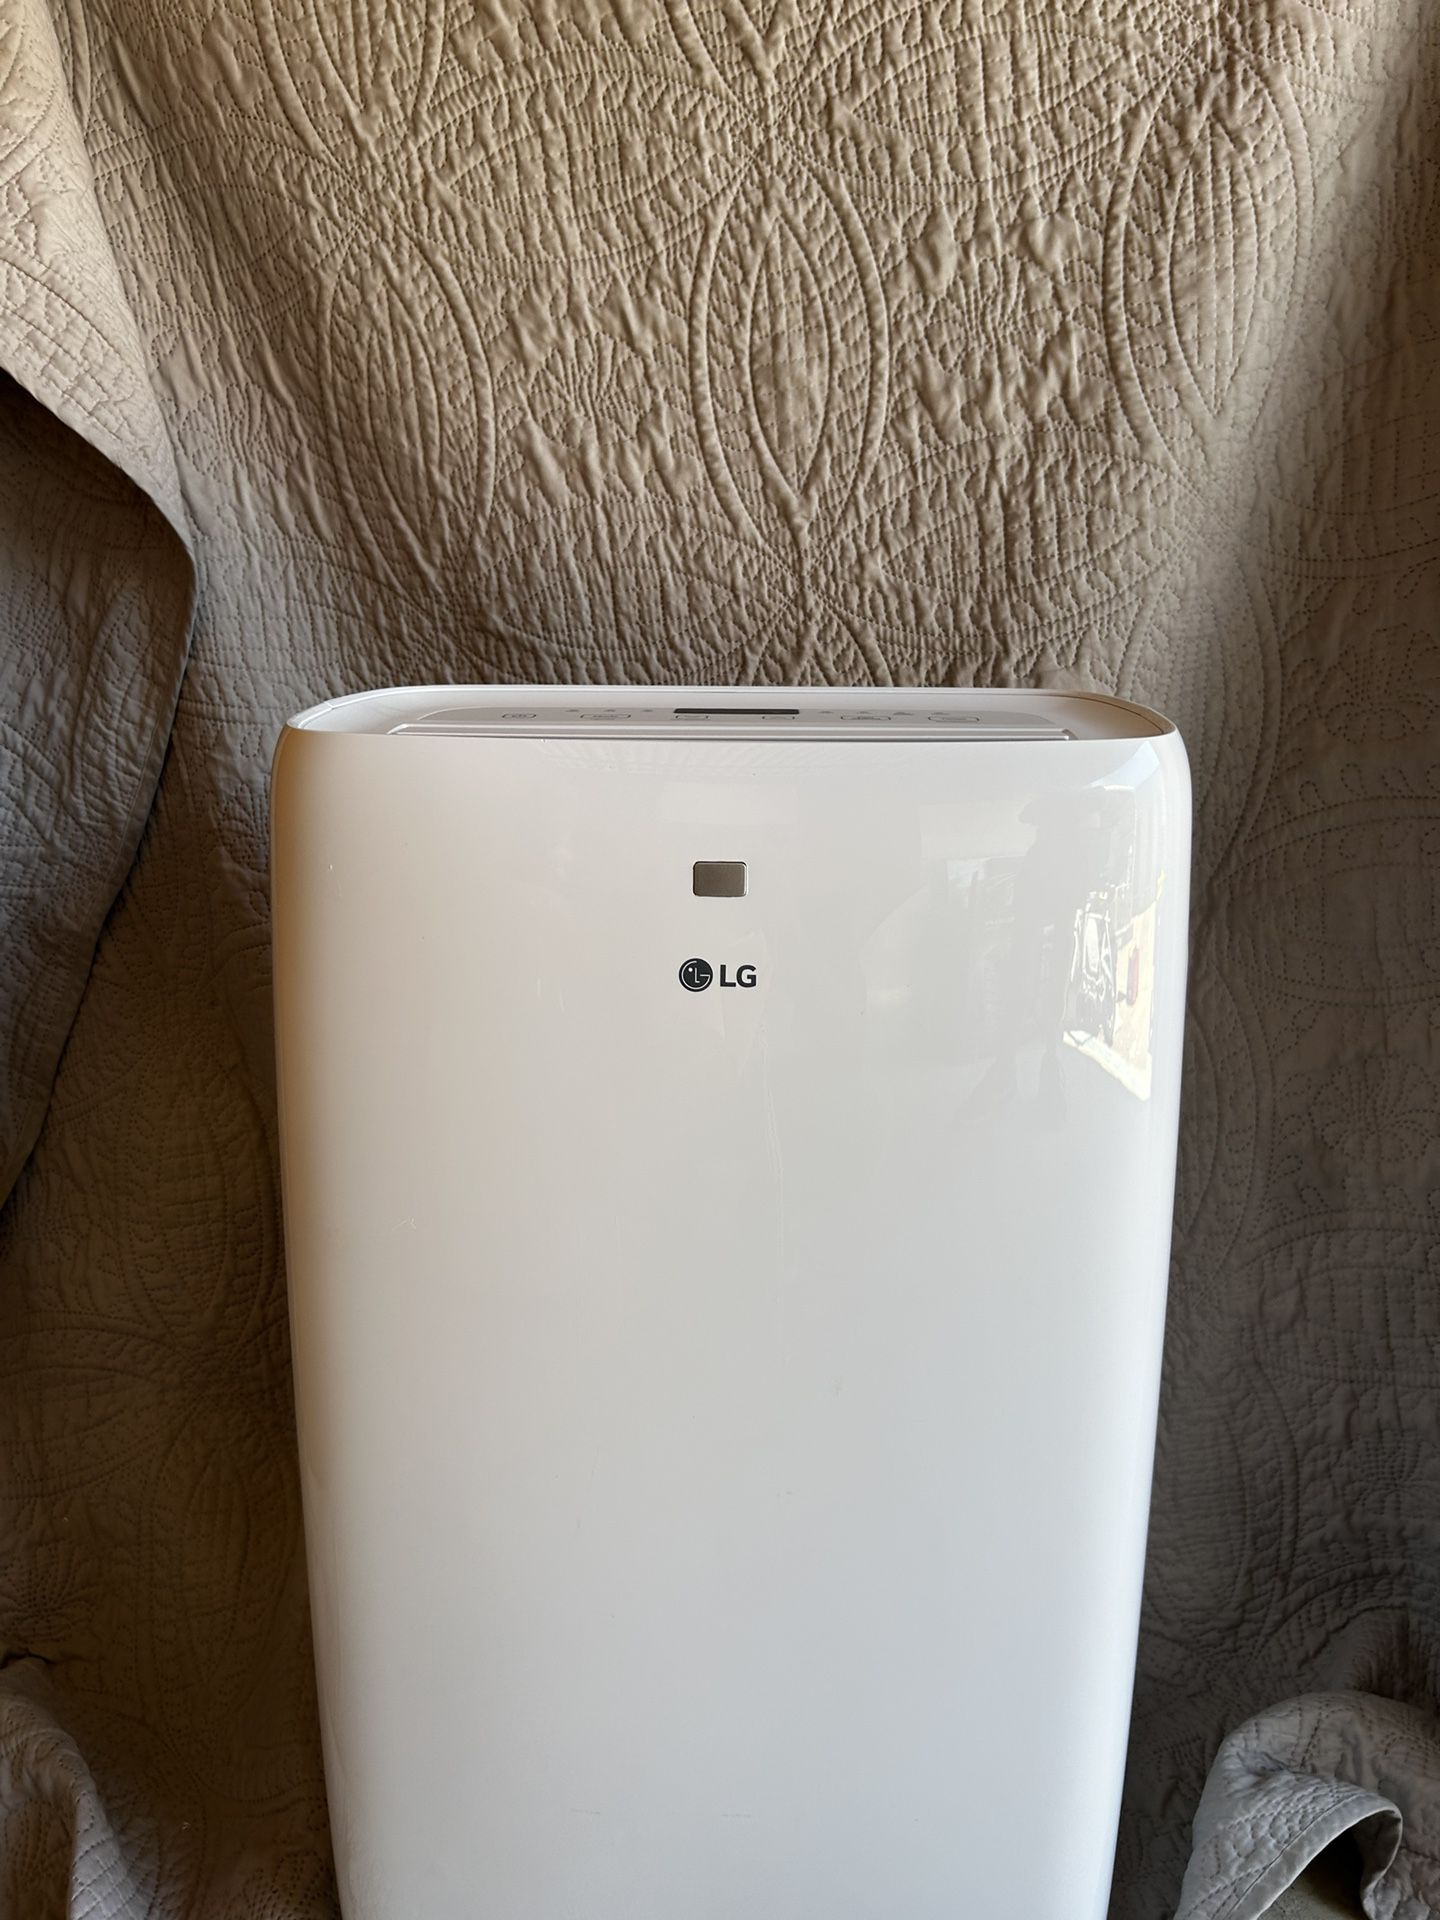 LG 6,000 BTU Portable Air Conditioner Cools 250 Sq. Ft. with Dehumidifier in White